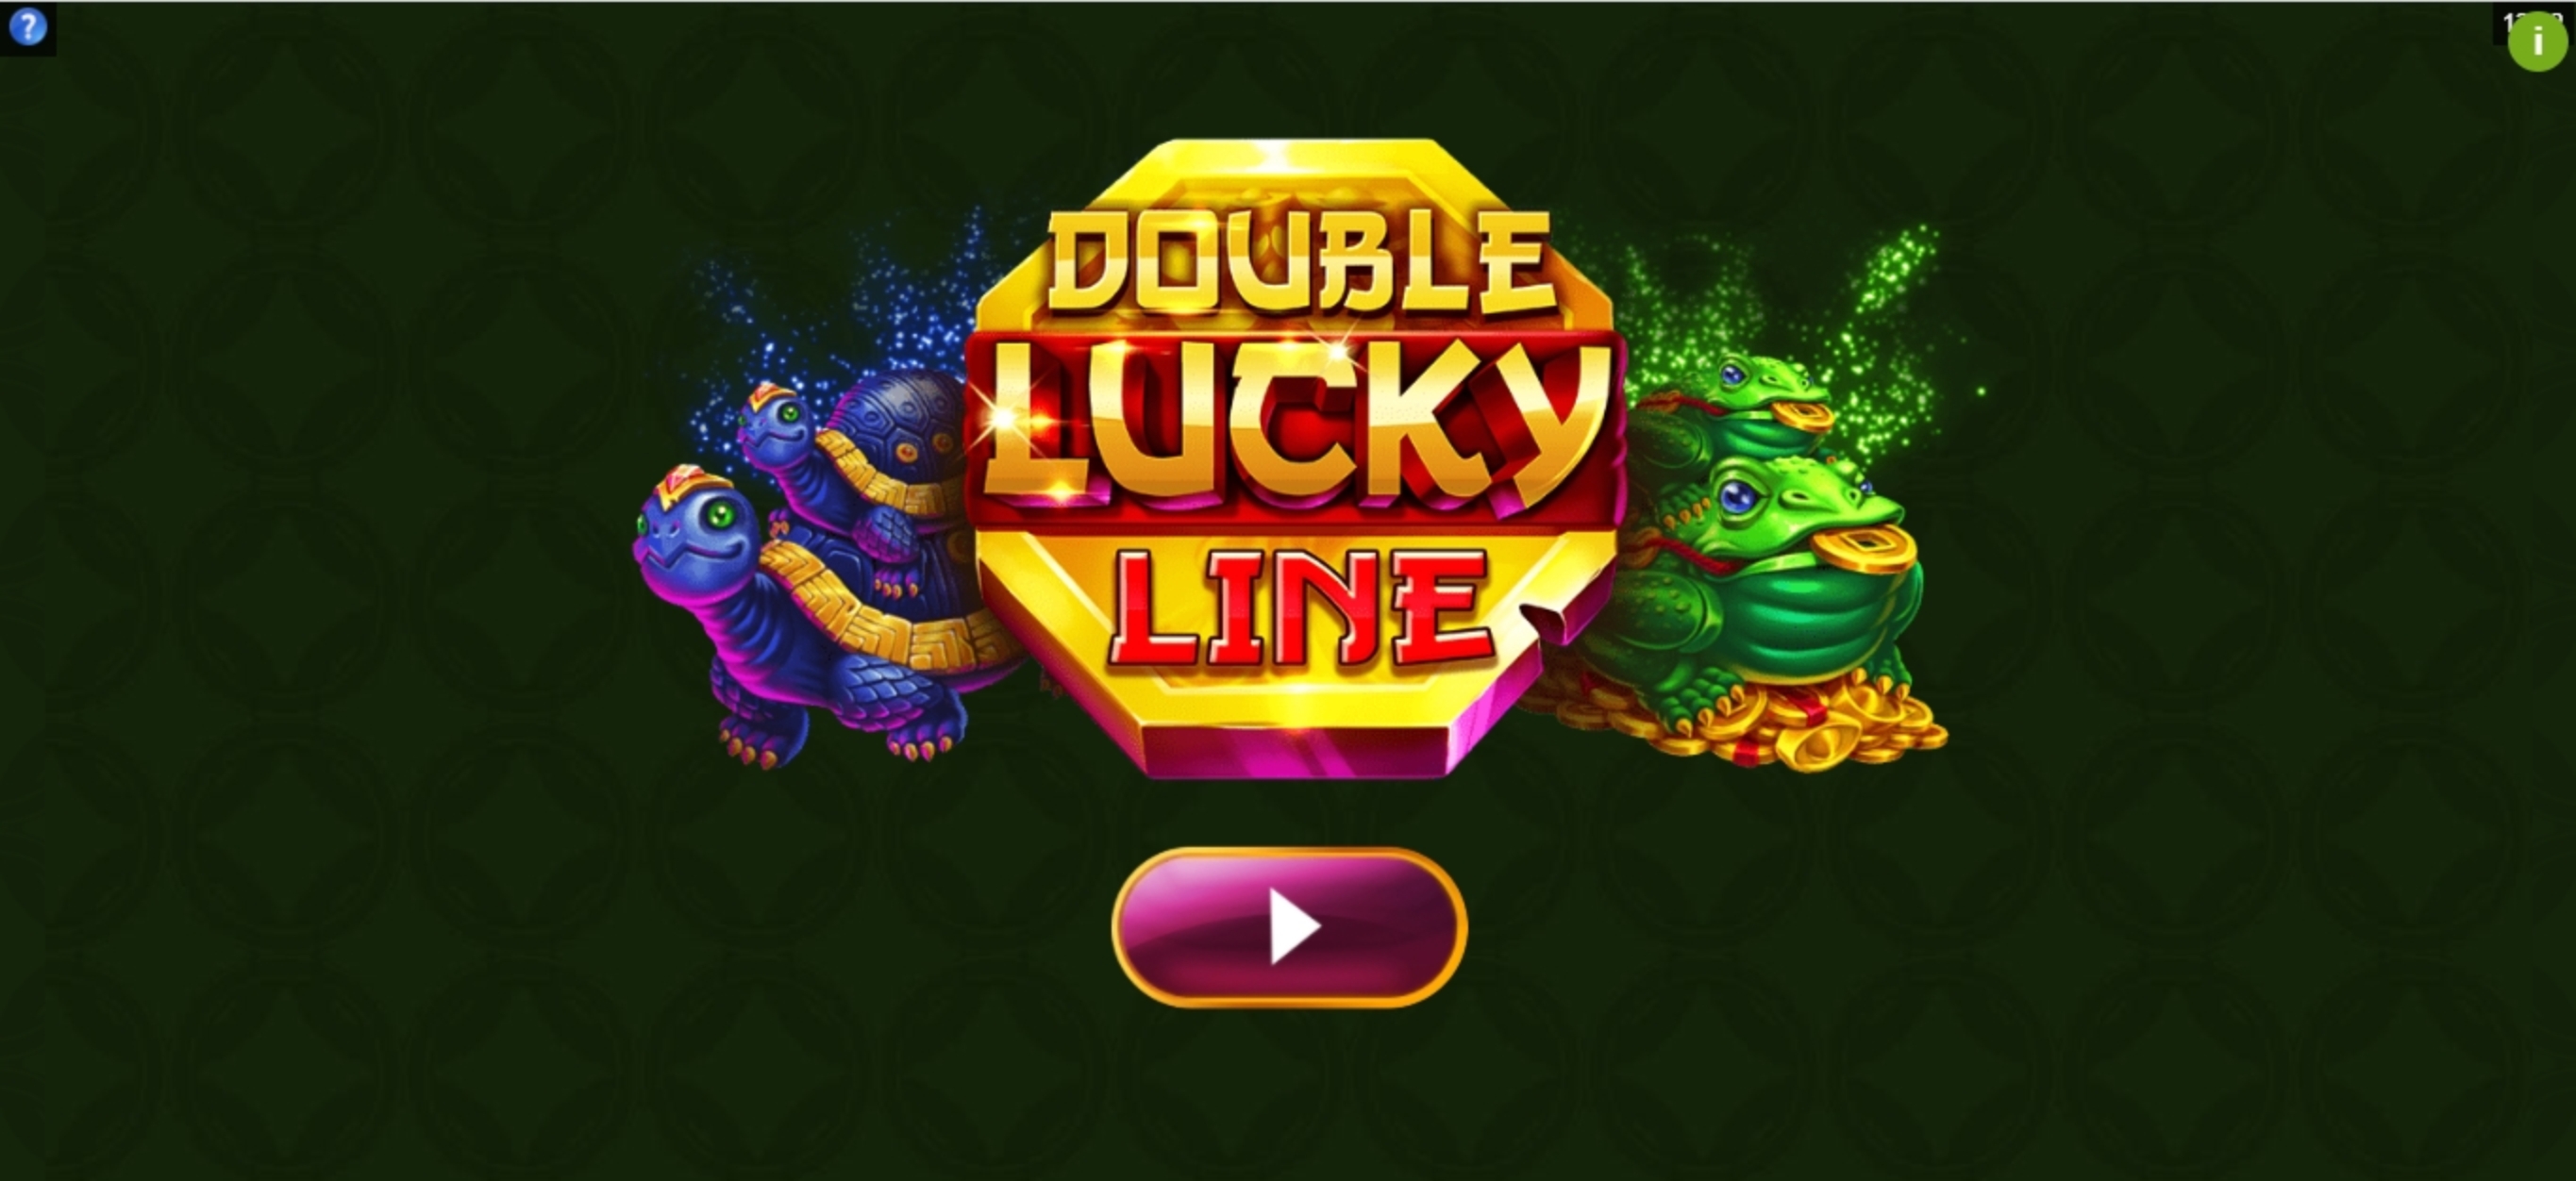 Play Double Lucky Line Free Casino Slot Game by Just For The Win